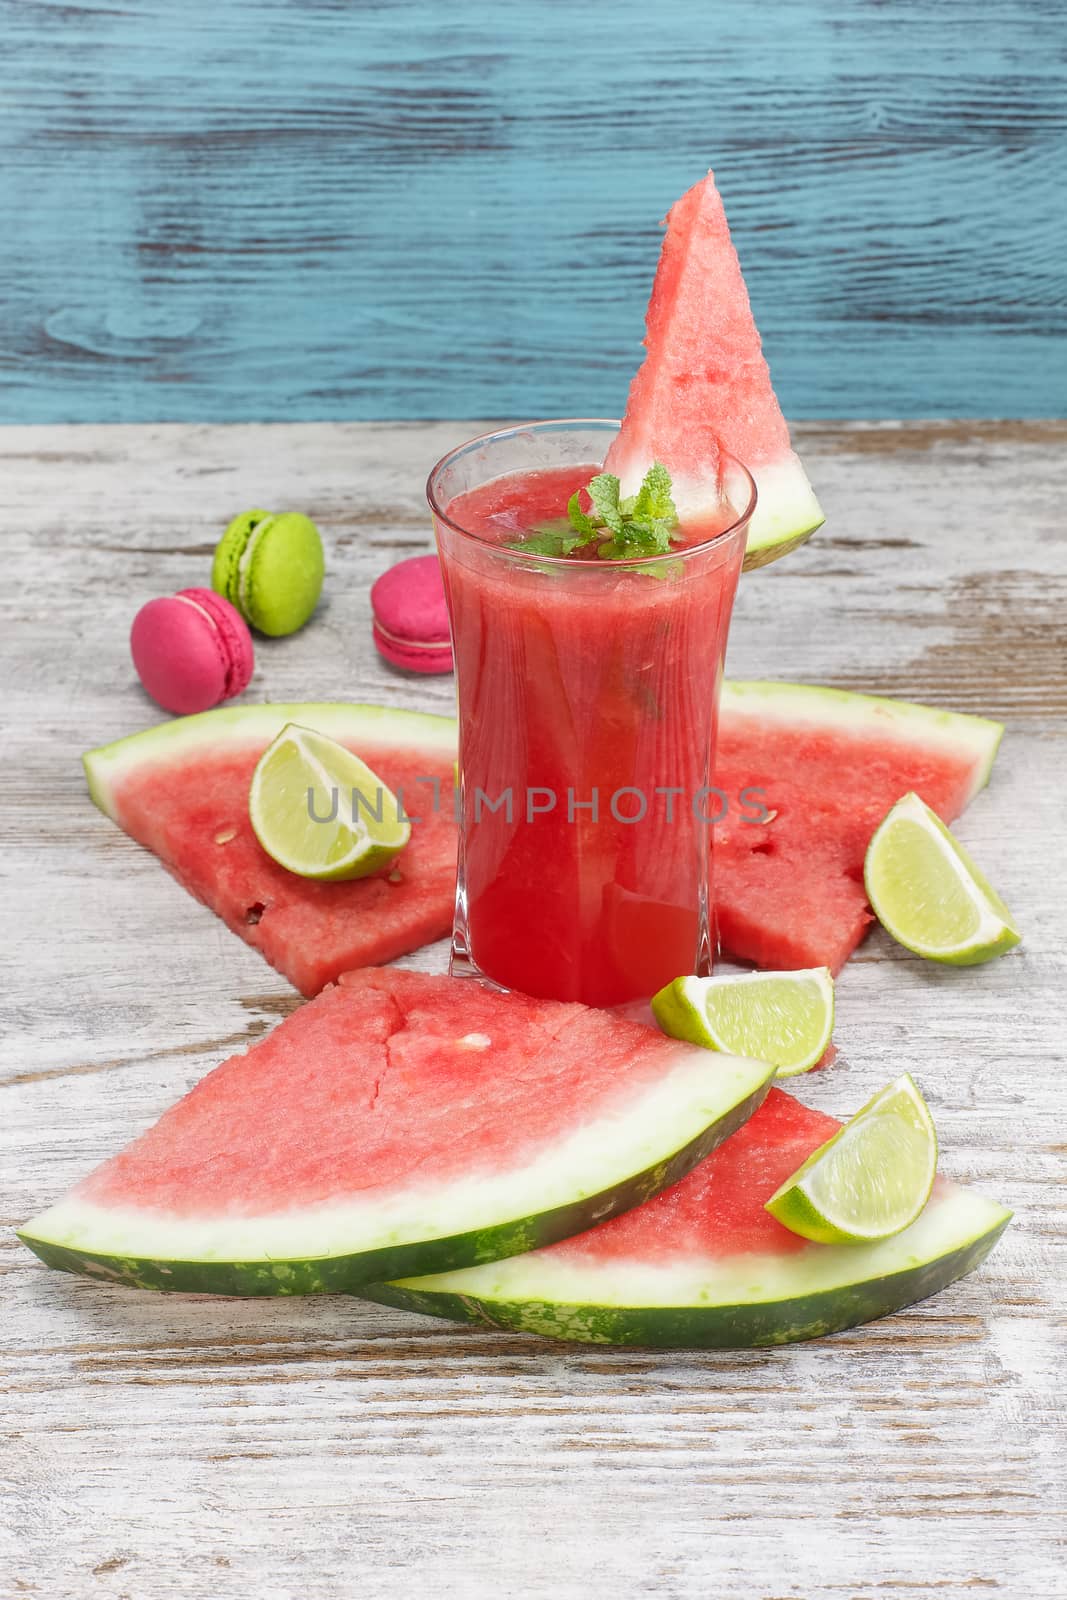 Watermelon with mint and lime juice. by Slast20